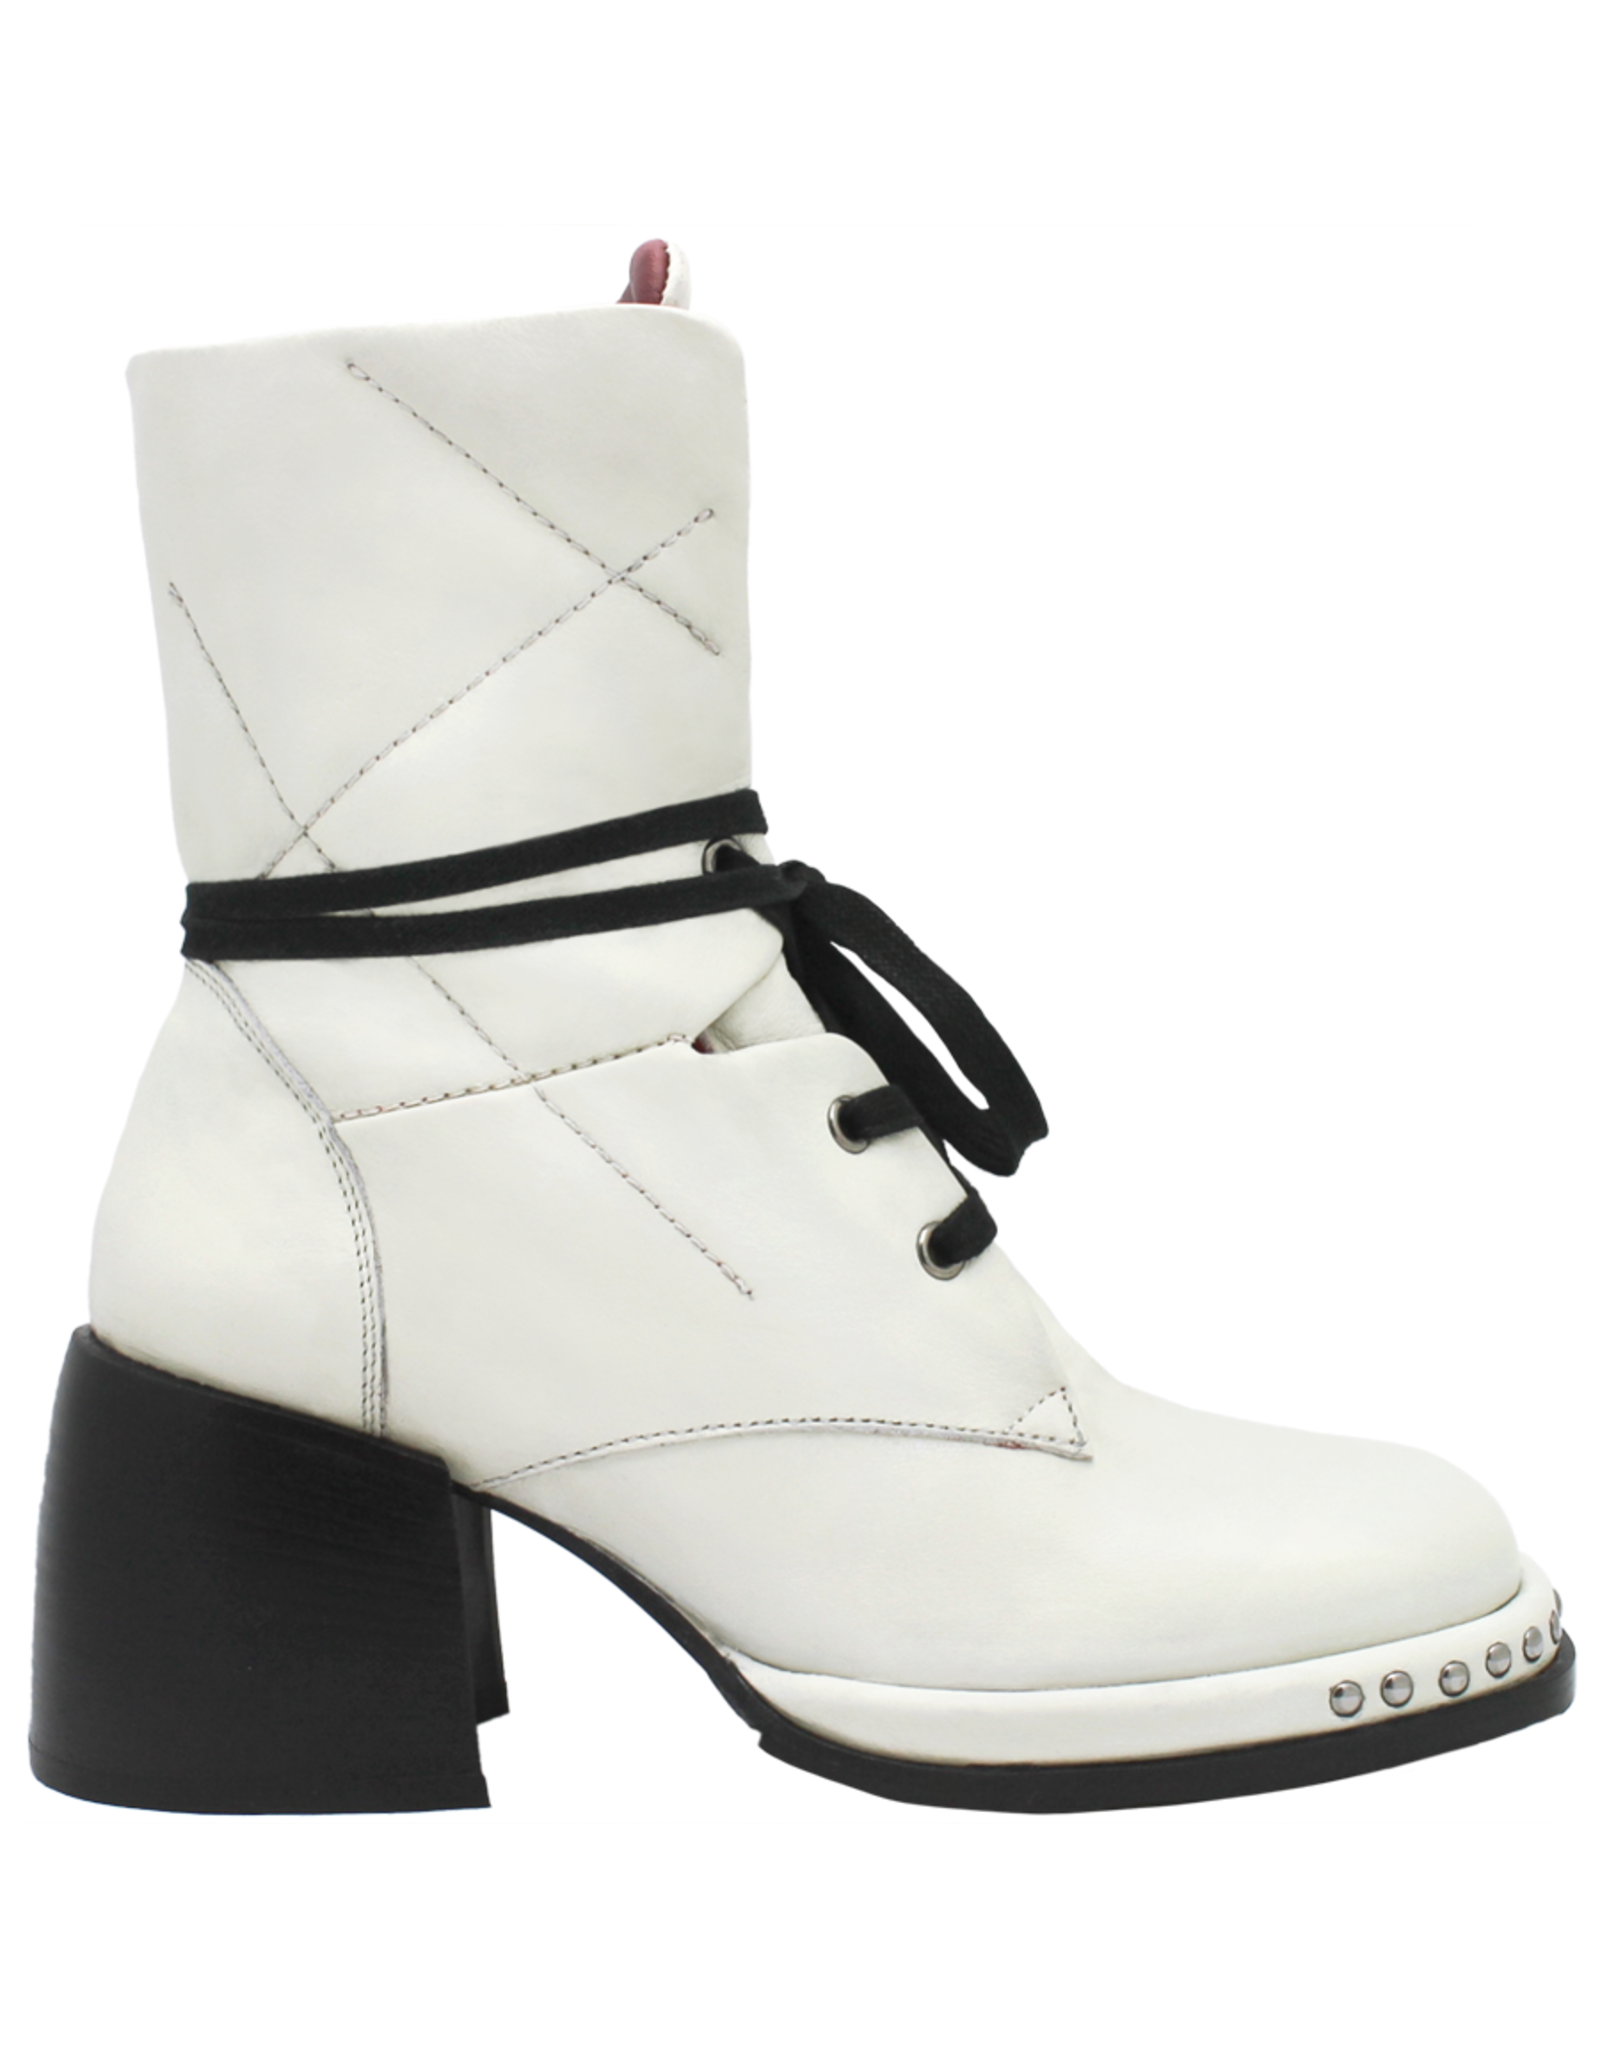 Ixos Ixos IS71R White Lace-Up Boot 1303